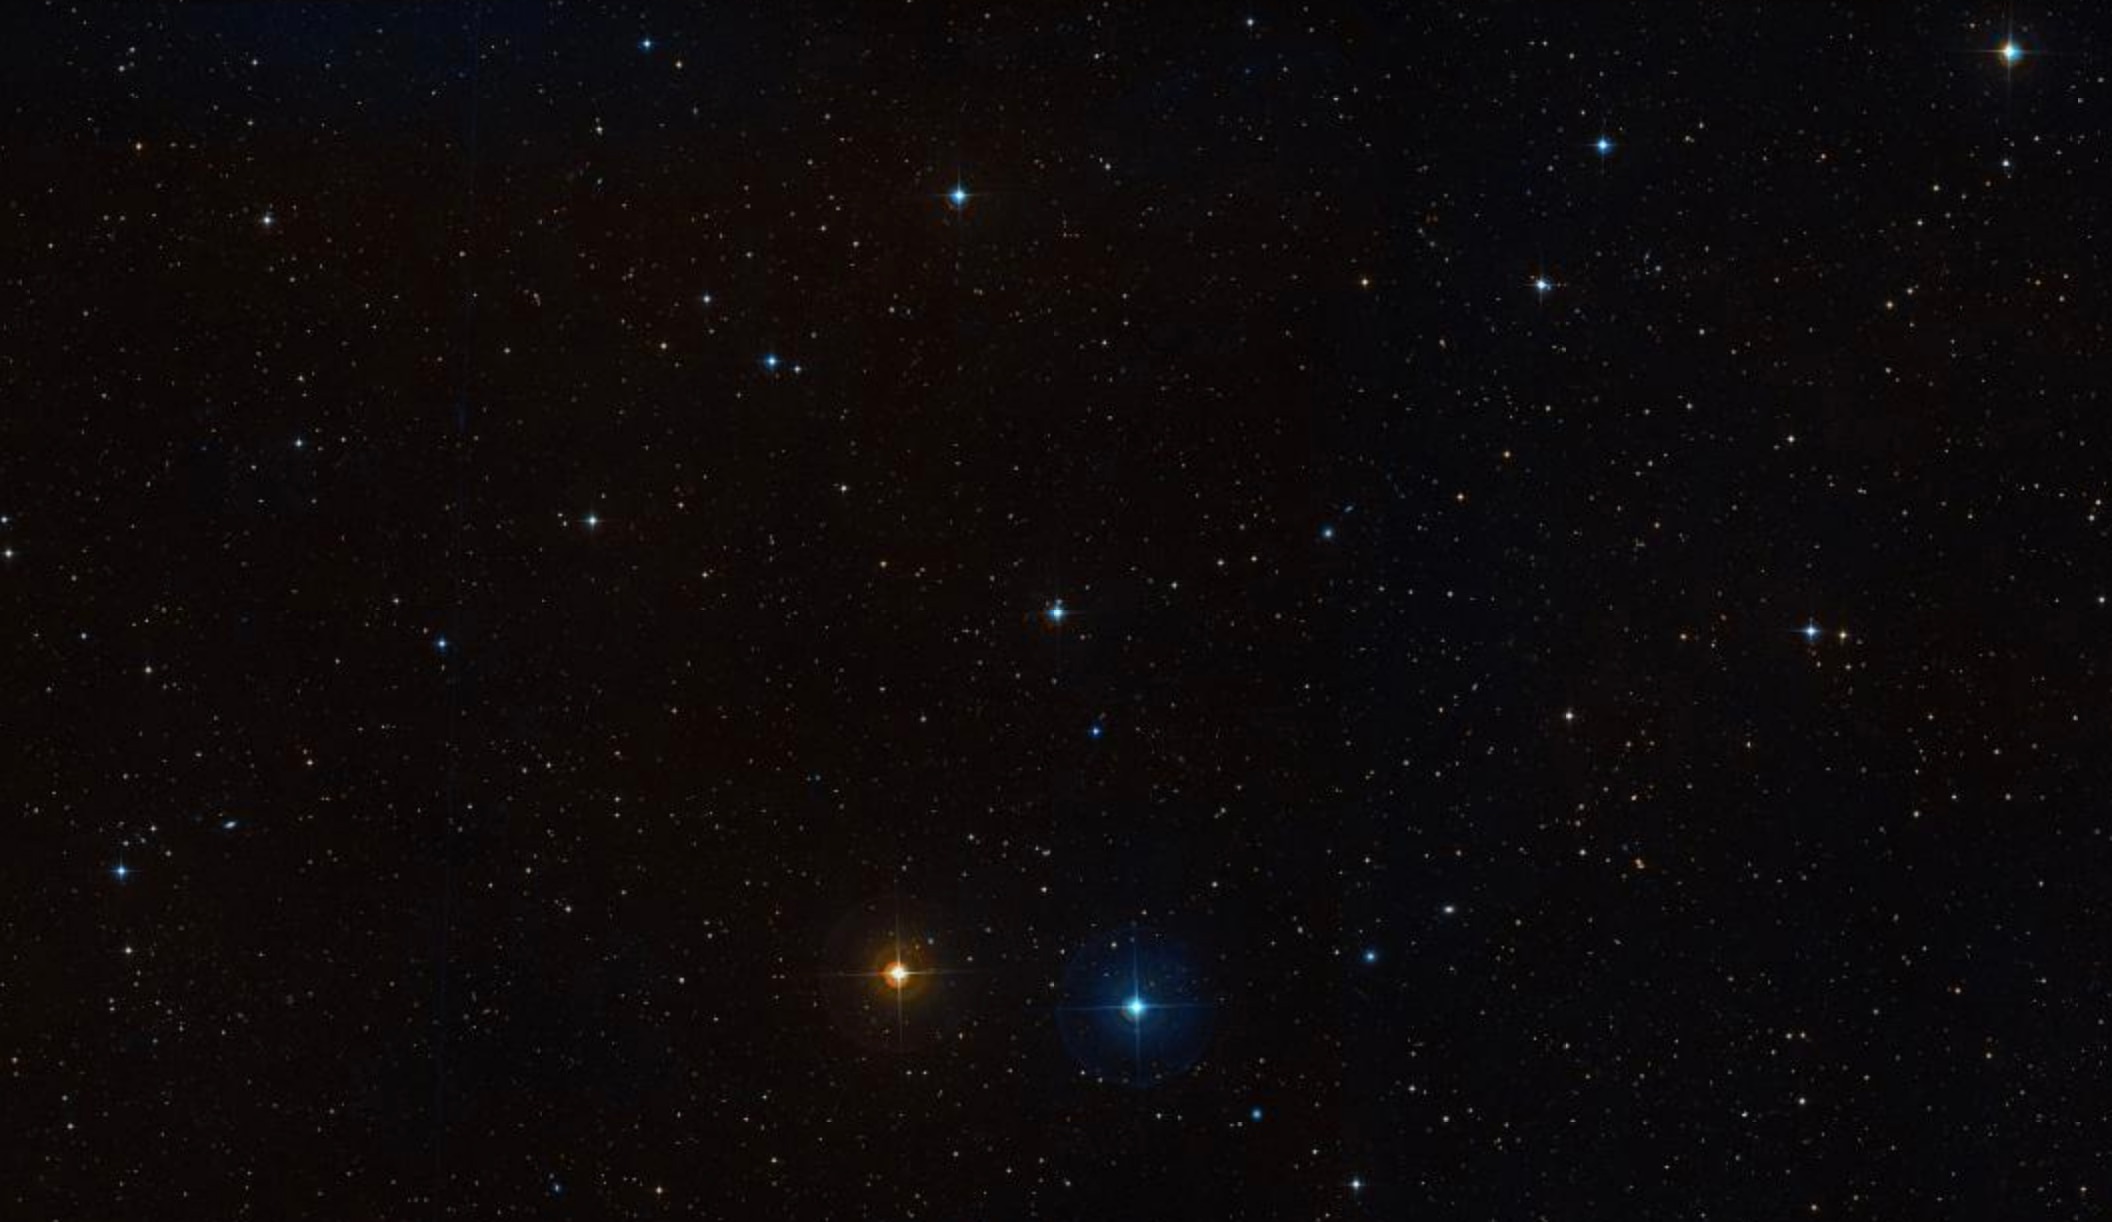 HD 4113 is the faint star dead center in the image. You might think it’s not much to look at… but when you look closely, it contains multitudes. Literally. Credit: Wikisky / SETI